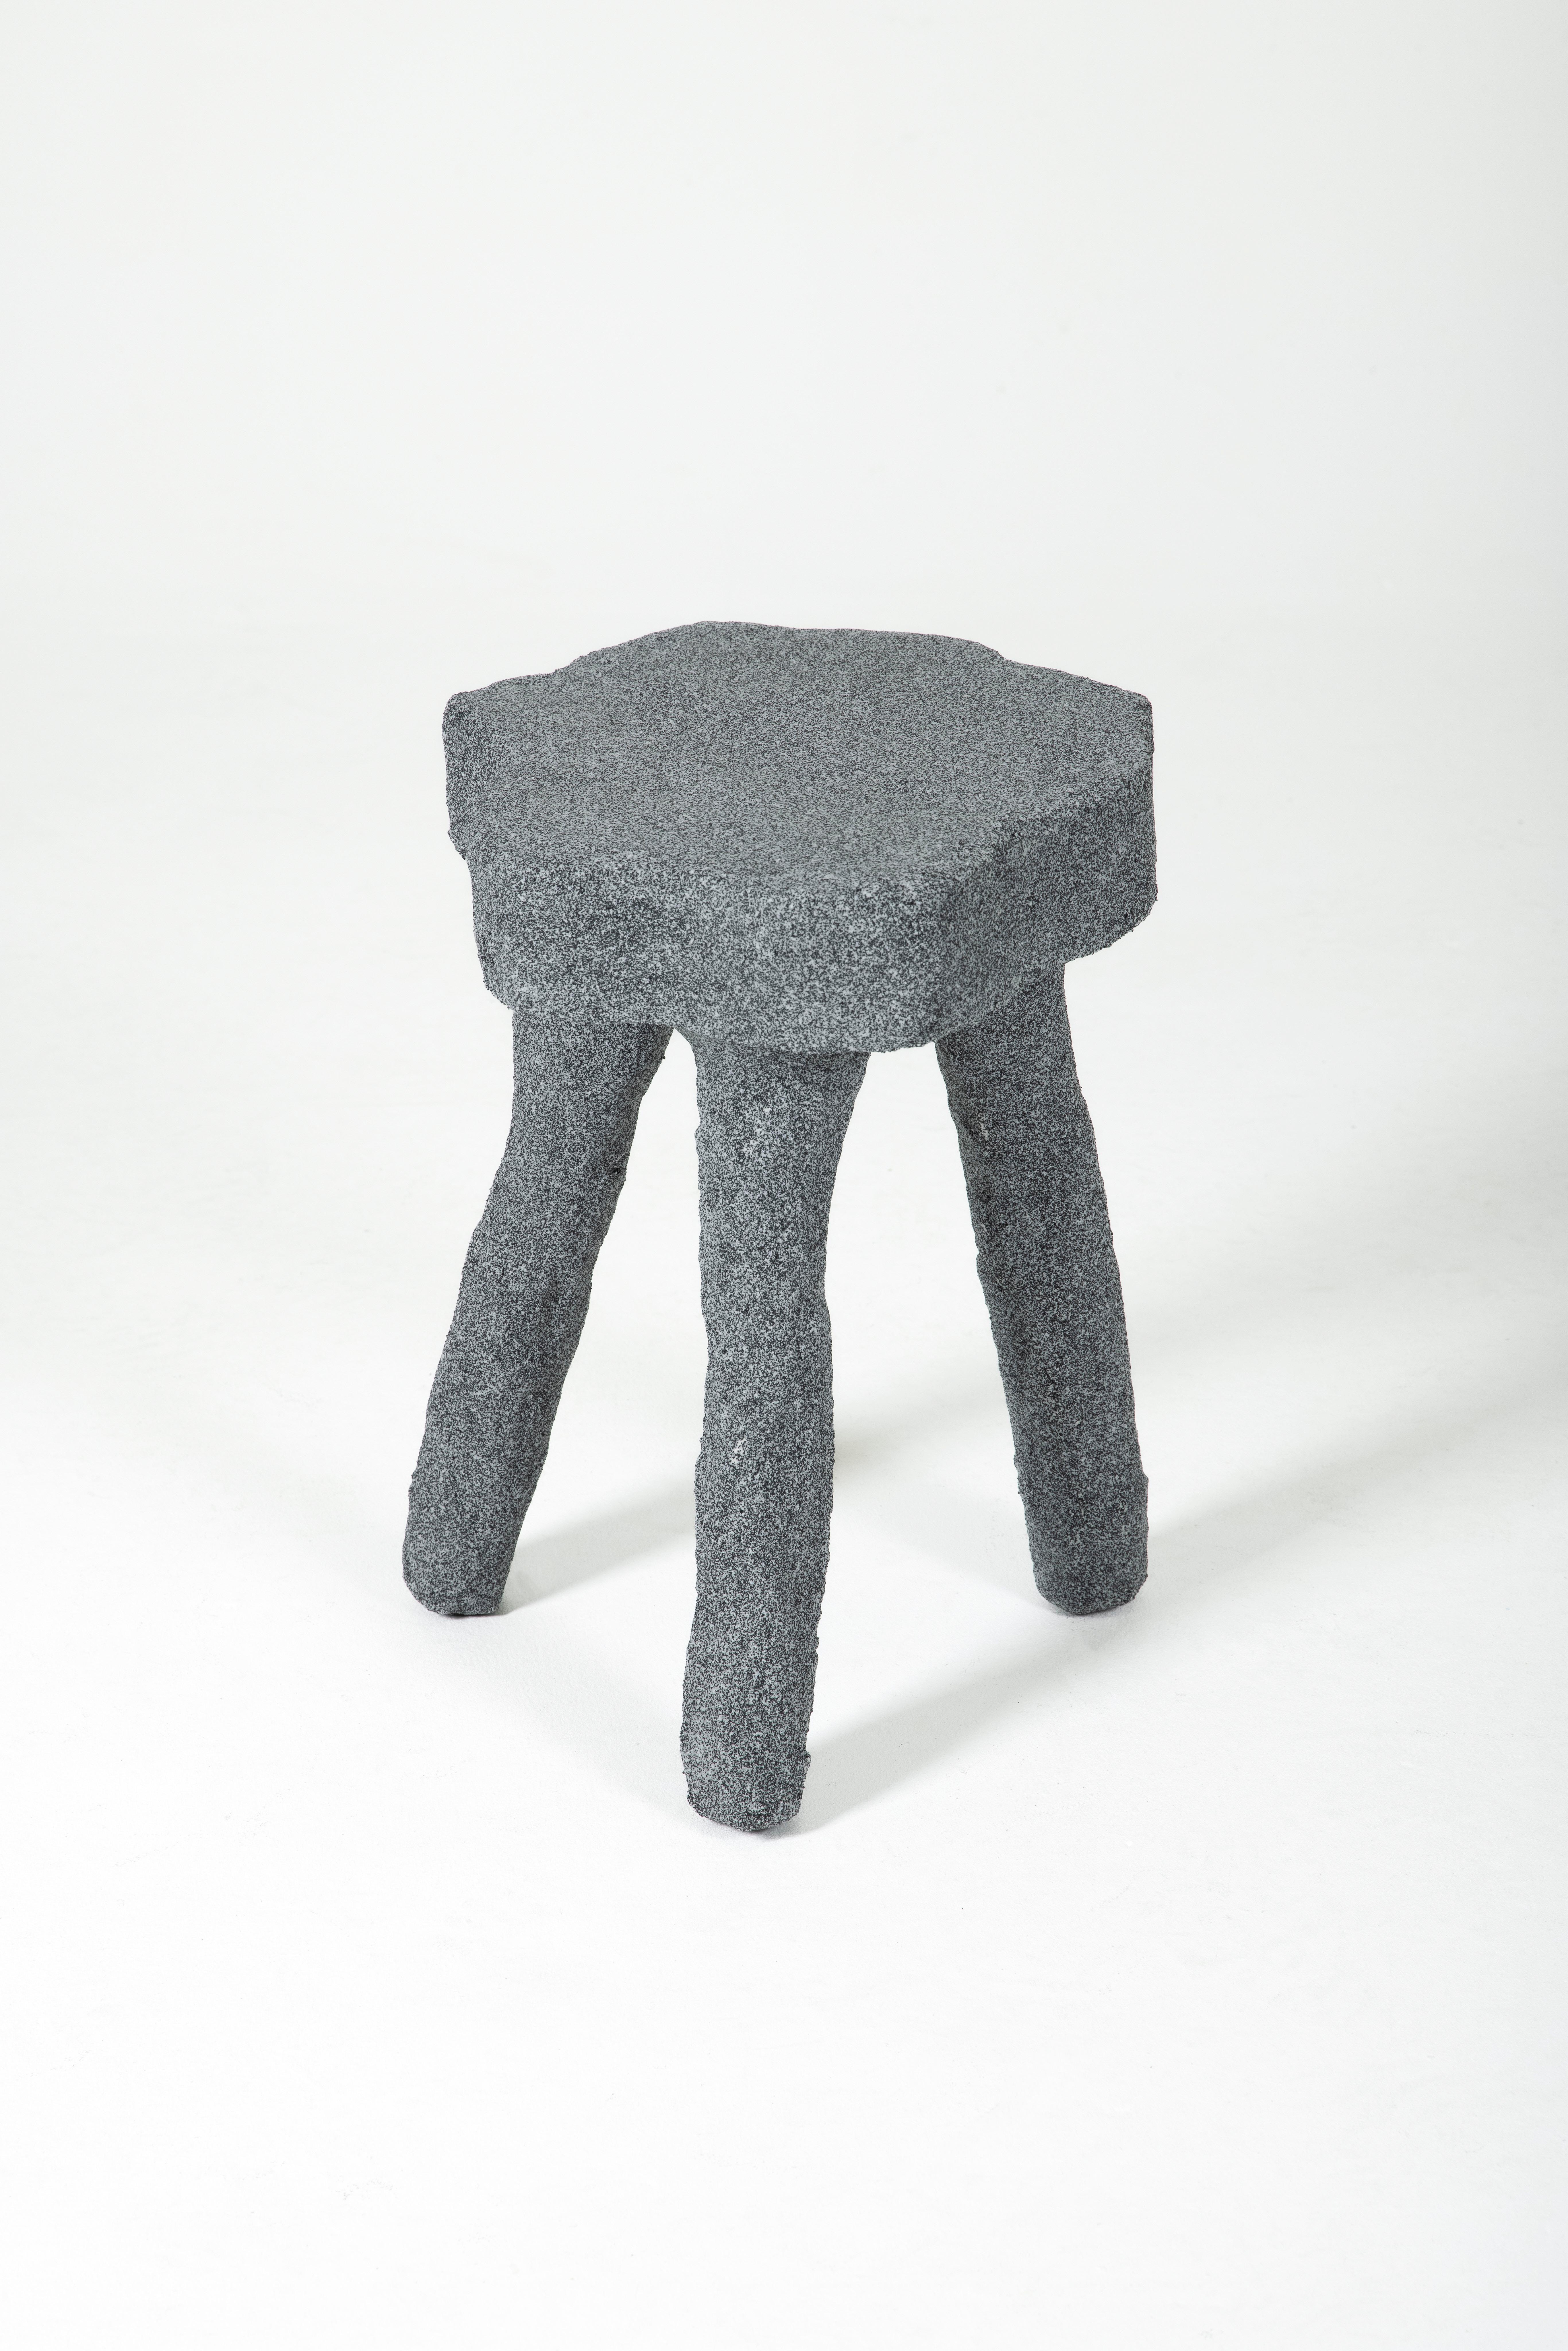 Pedestal table in plaster and grey sand by Paul hardy. Composed of 3 legs and asymmetrical top. Contemporary edition.